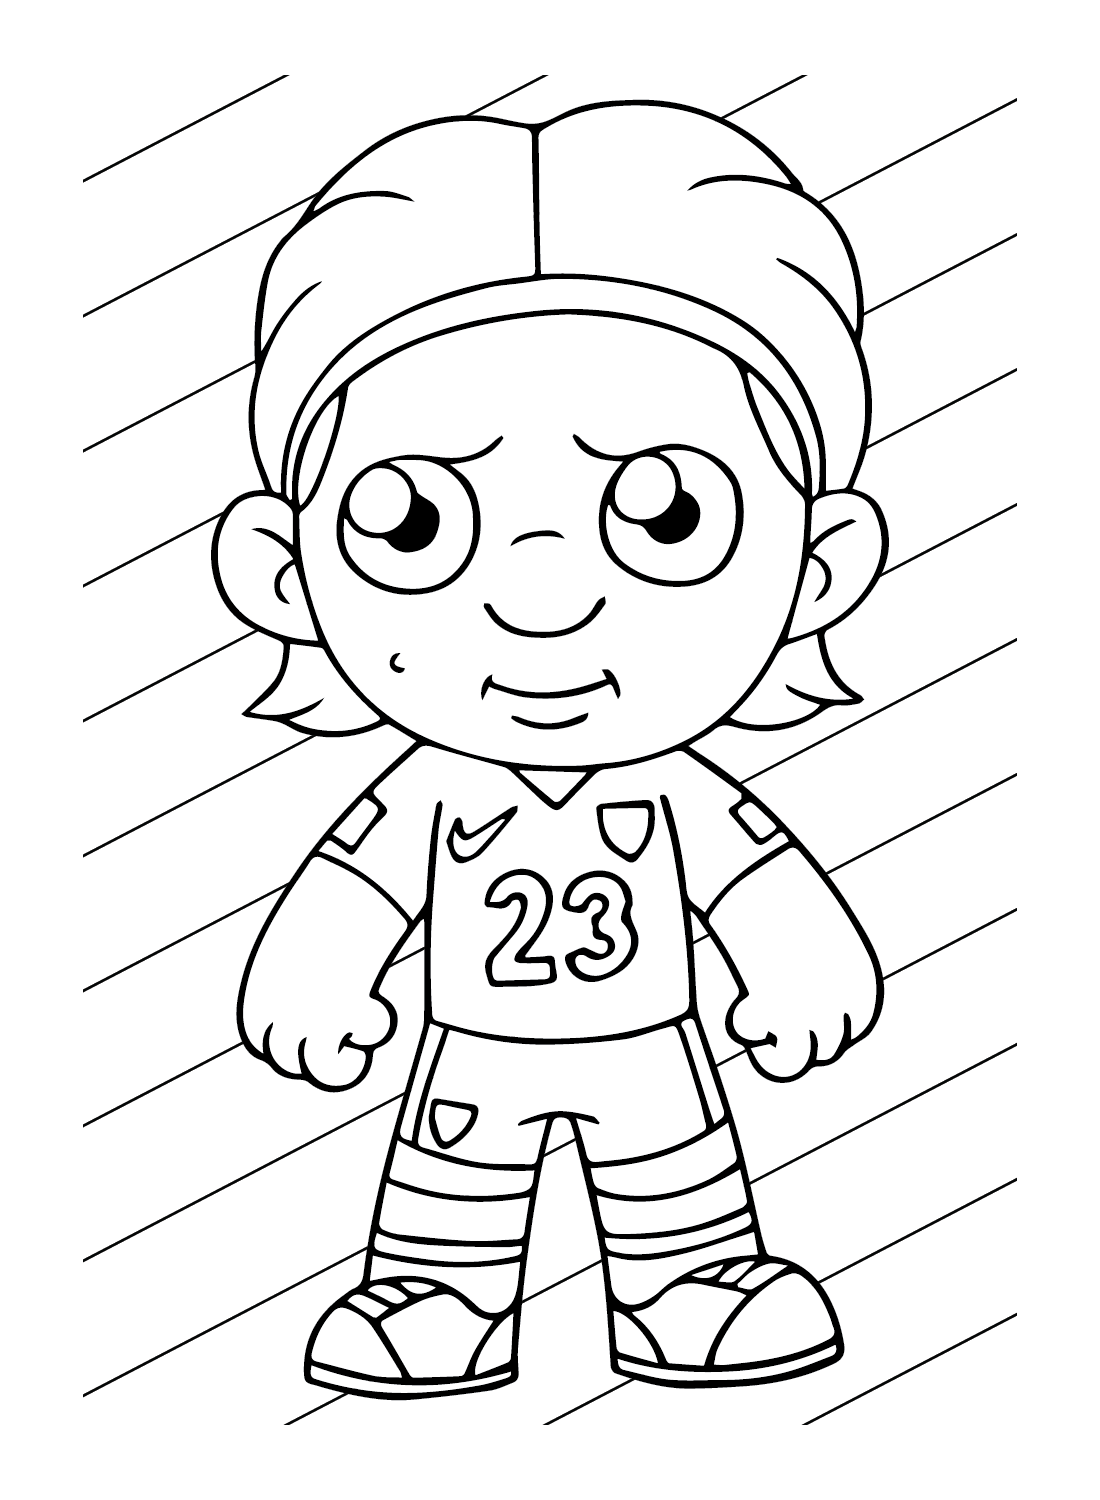 Erling Haaland Chibi Coloring Page